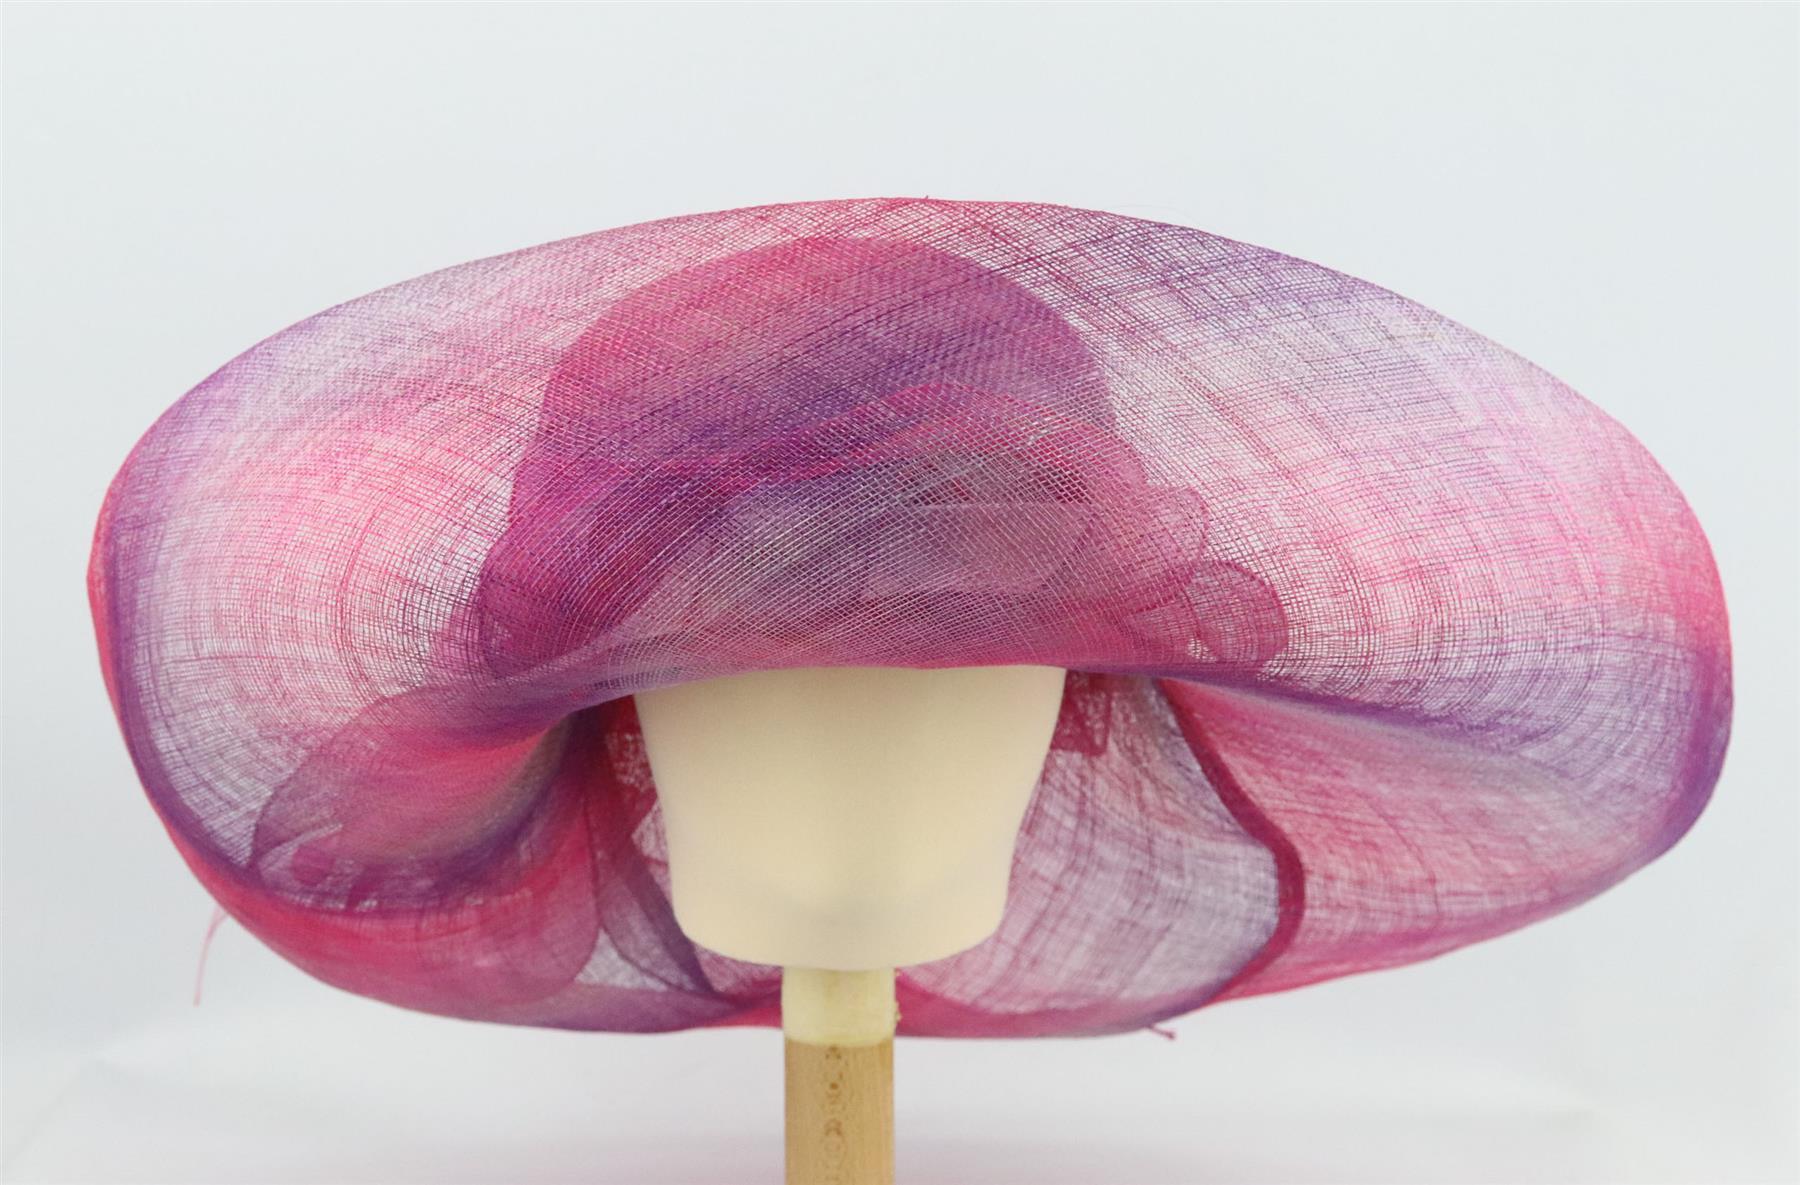 This hat by Marzi from Harrods is made from pink and purple sinamay straw and organza in a structured sweeping silhouette and finished flowing detail along the front. Pink and purple straw, pink organza. Slips on. 100% straw. Comes with box.